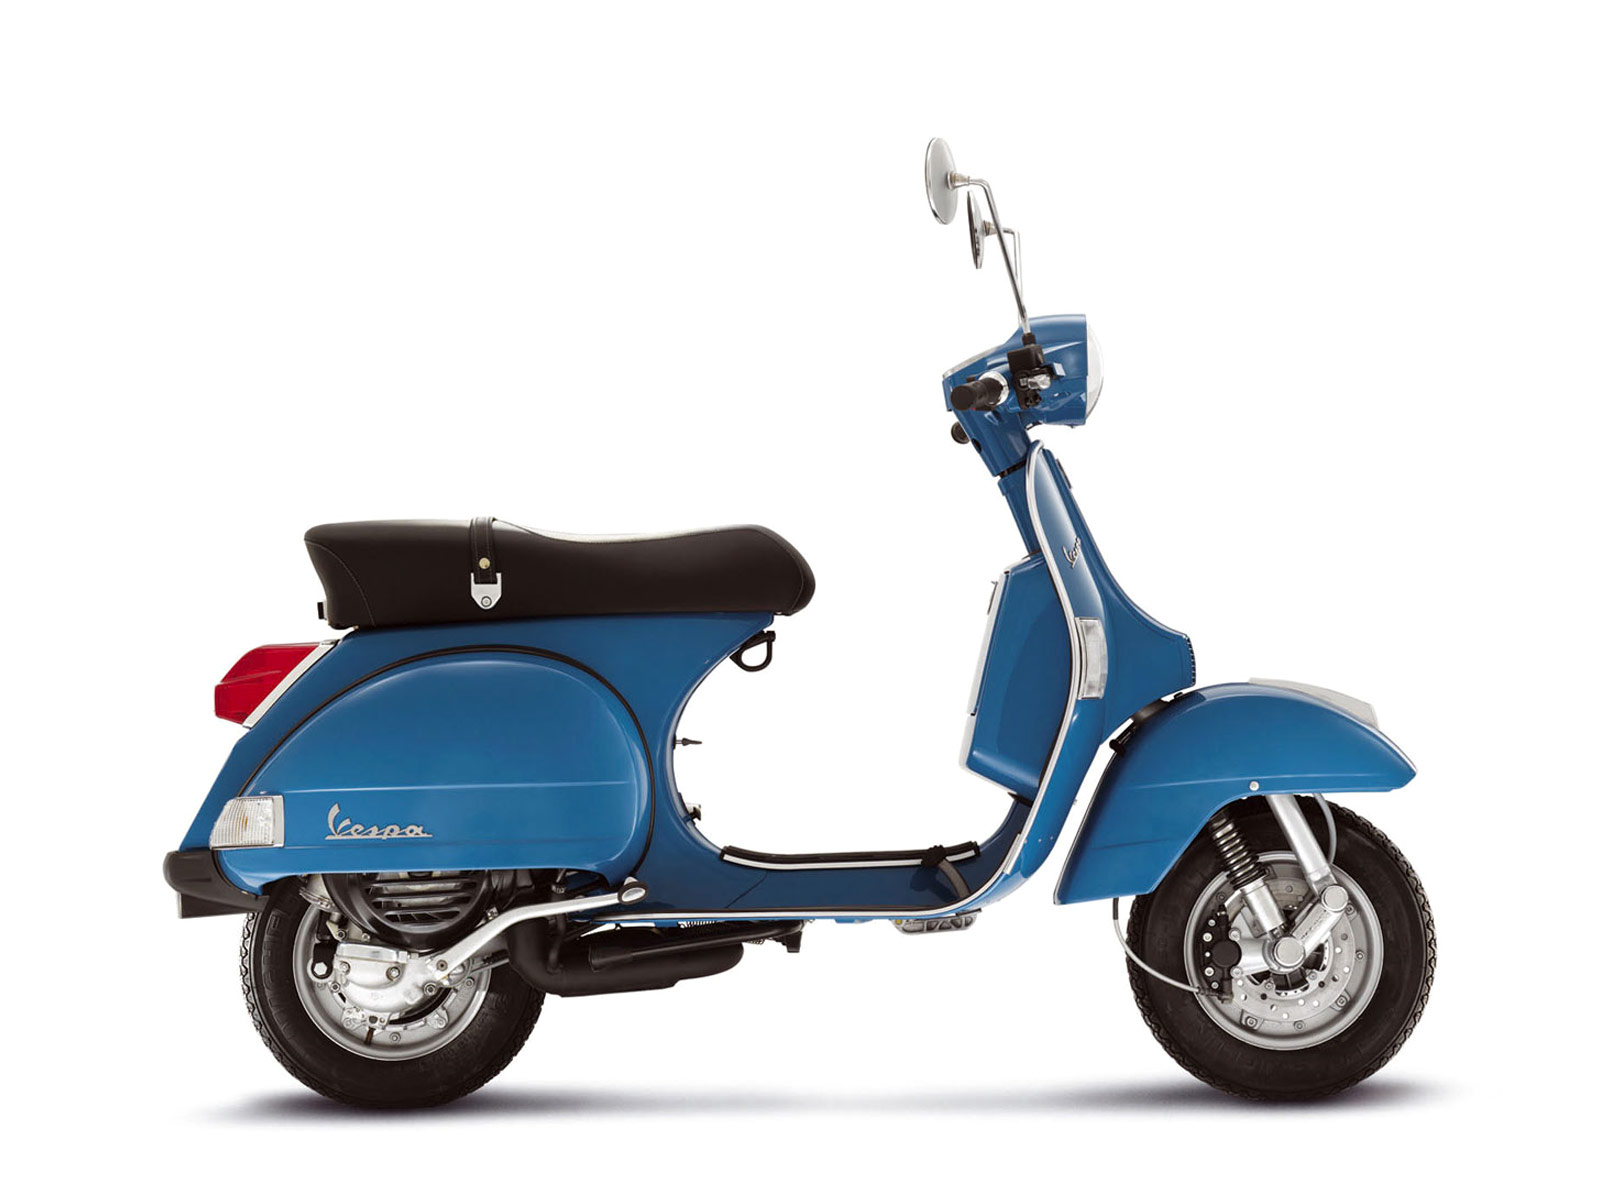 2011 VESPA PX 150 pictures, specifications